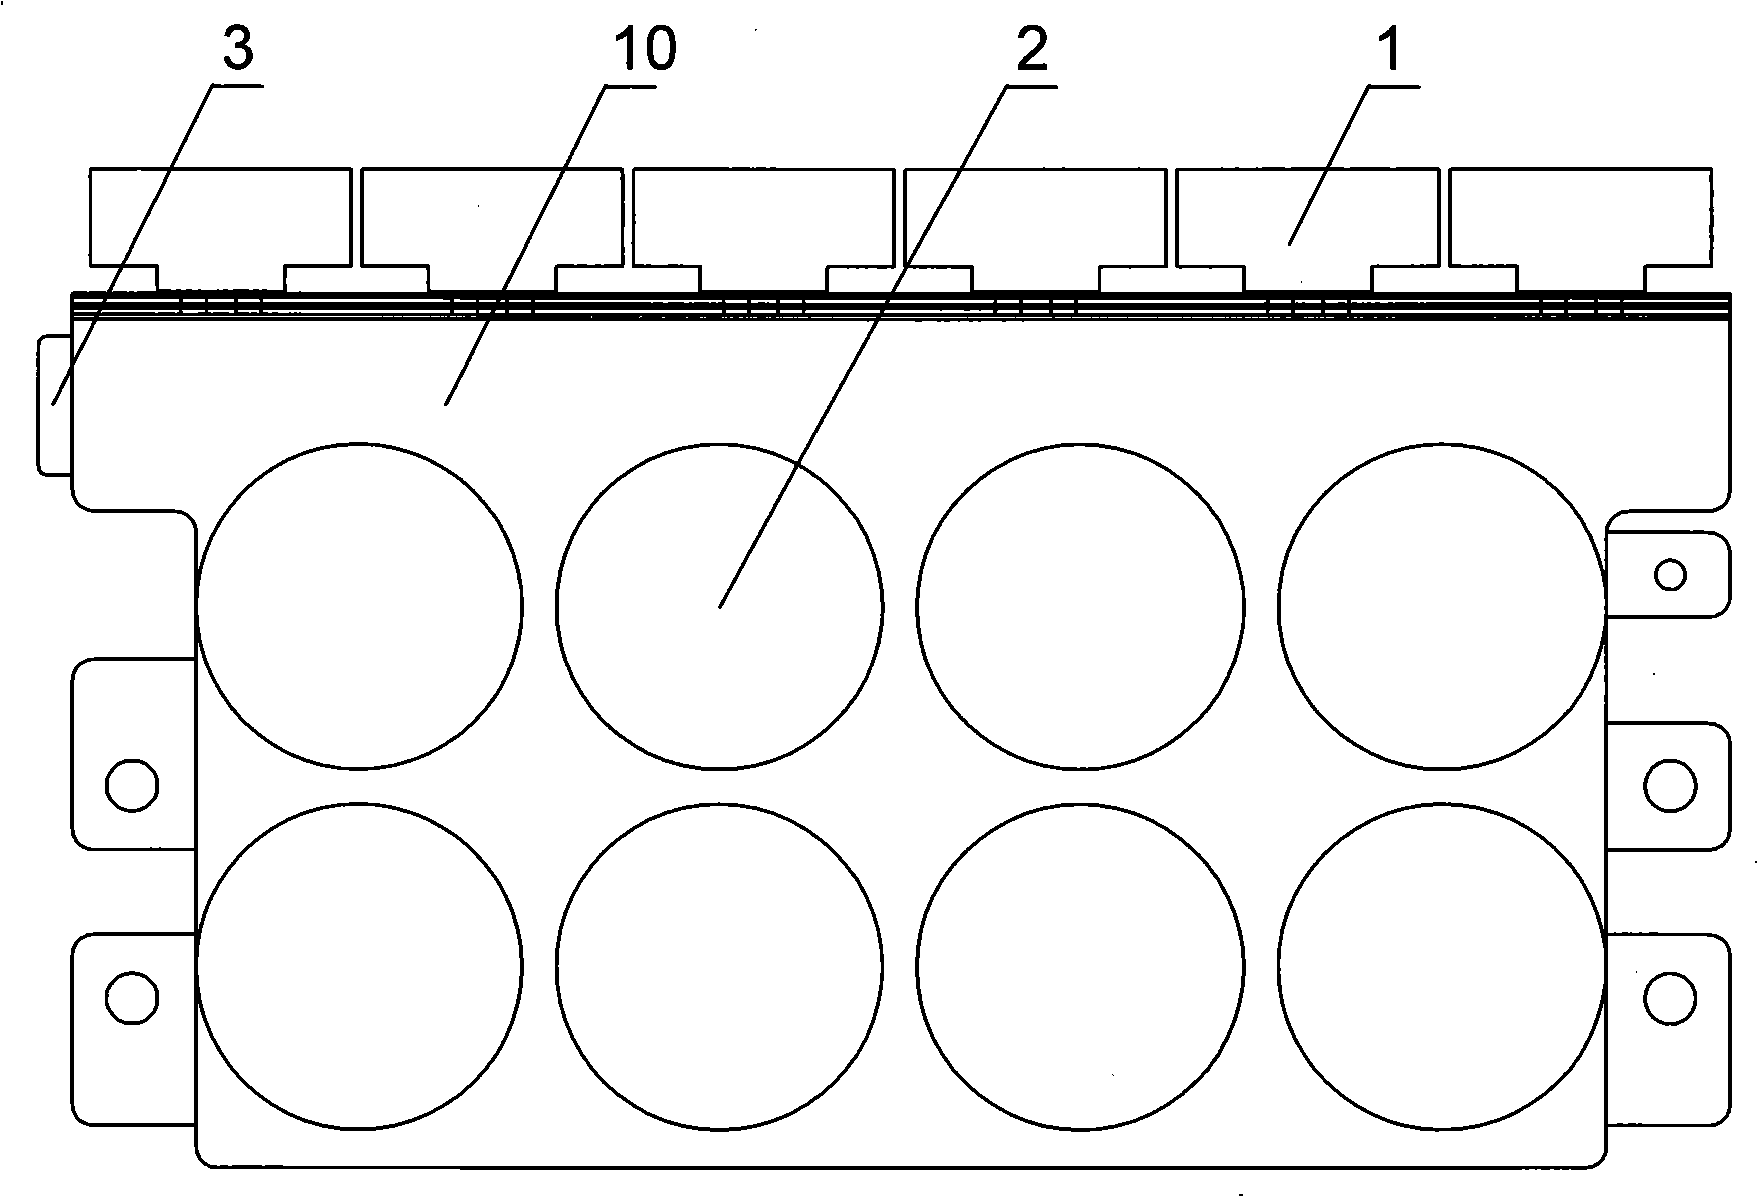 Current transformer power module main body apparatus and its processing method